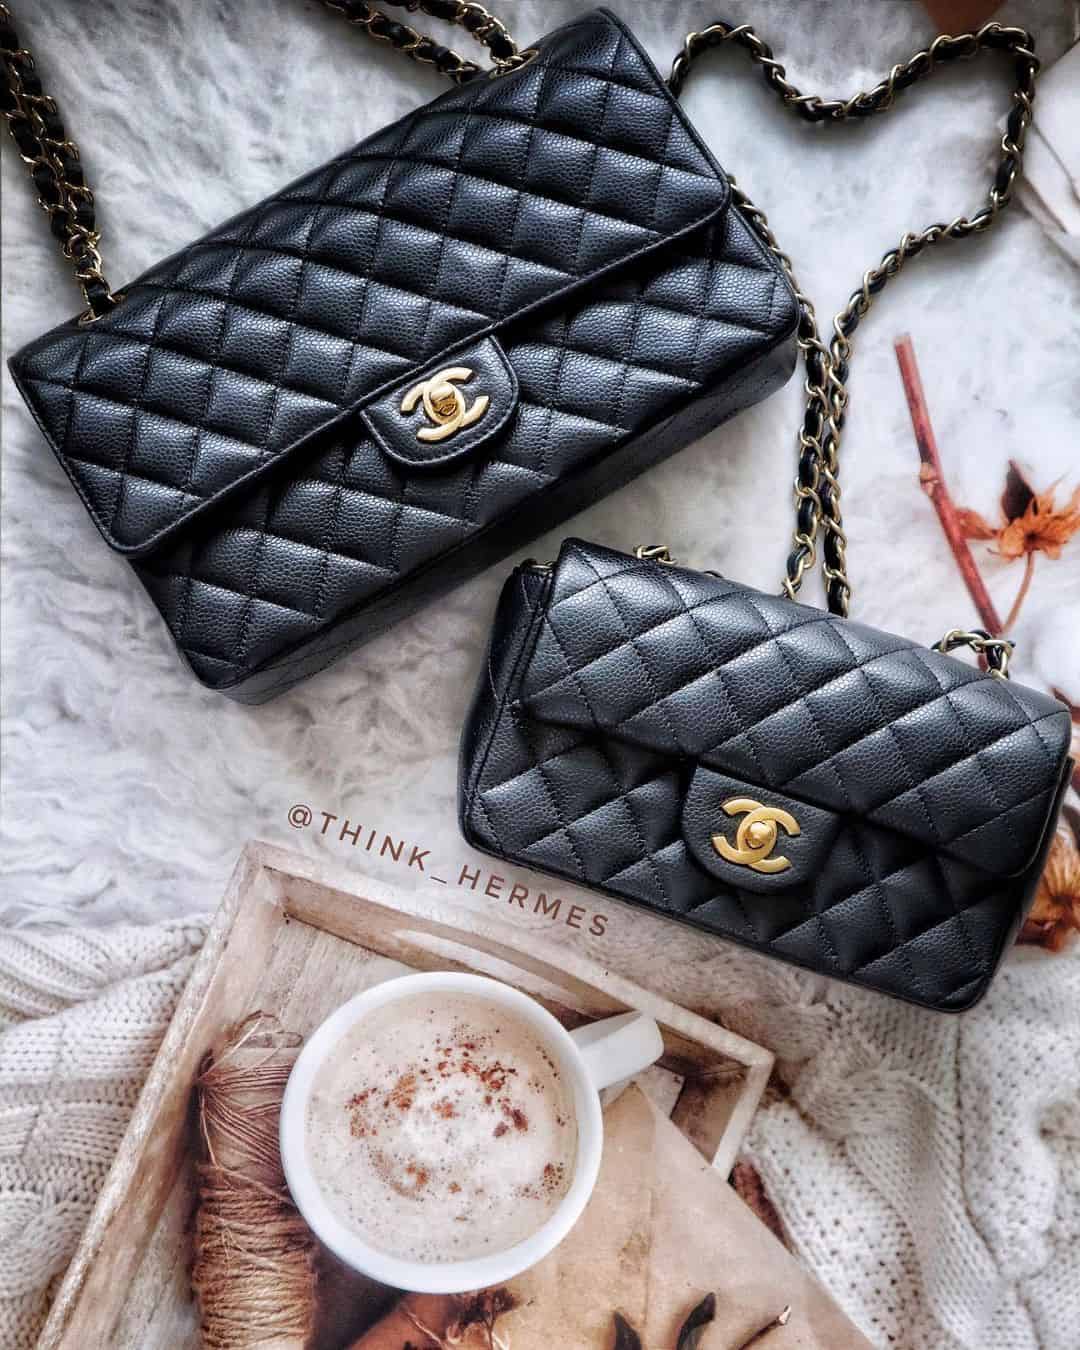 Irreplaceable Odds Identificere 7 Most Popular Chanel Bags of all time • Petite in Paris